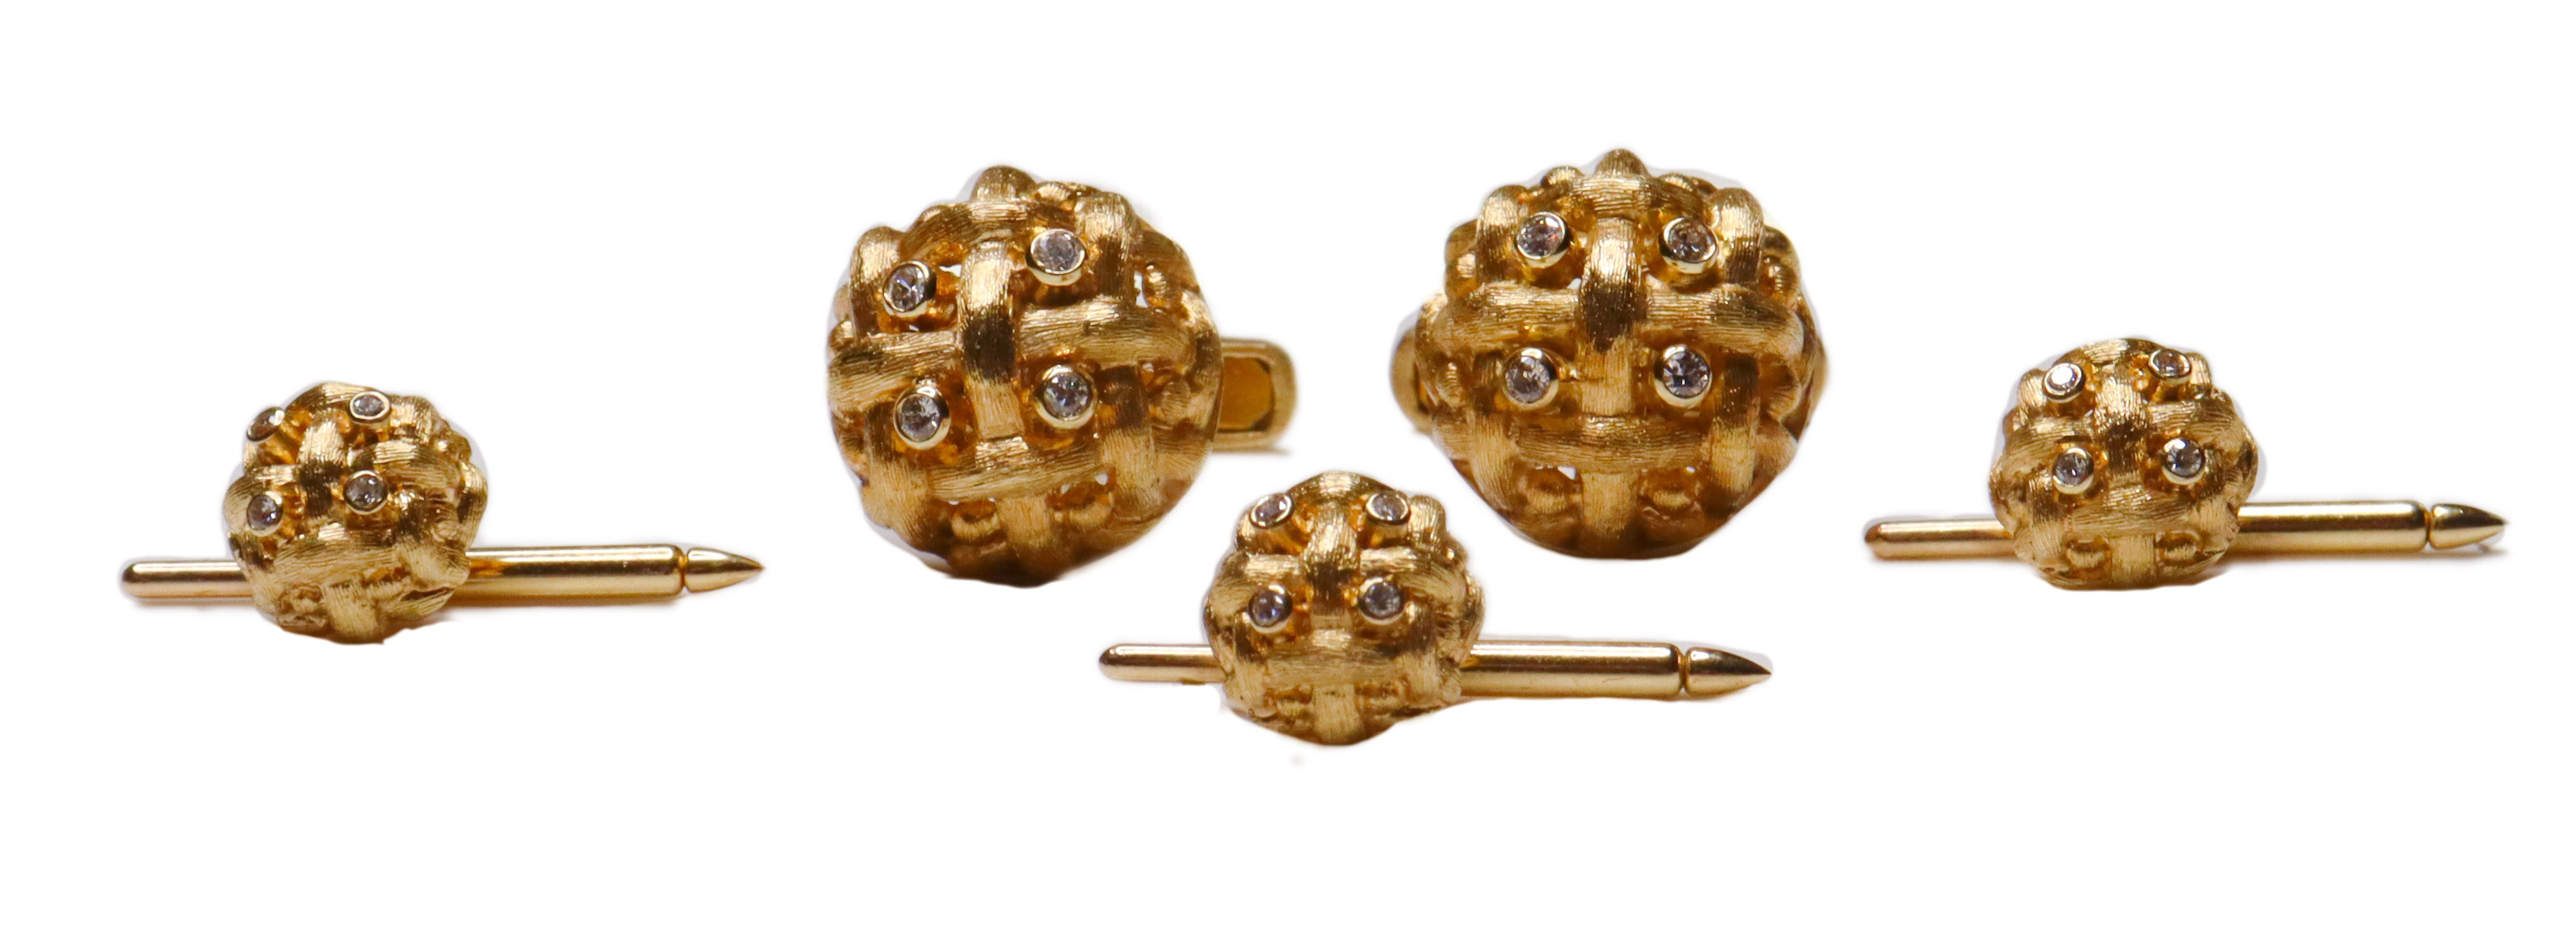 Vintage Diamond and Gold Cufflinks and Tuxedo Studs